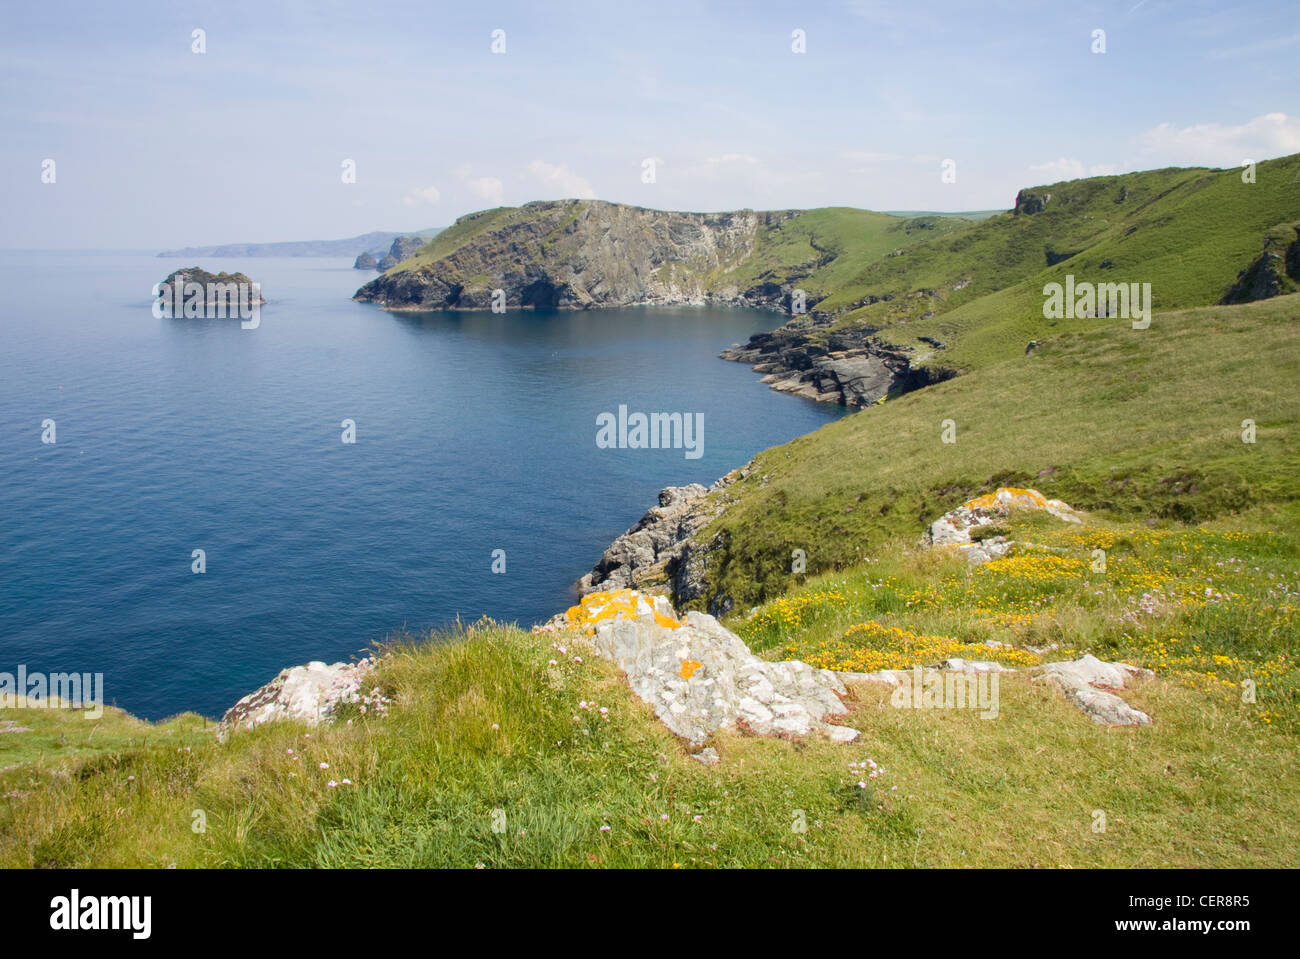 A view along the North Cornwall coastline from Barras Nose towards The Sisters islands. Stock Photo